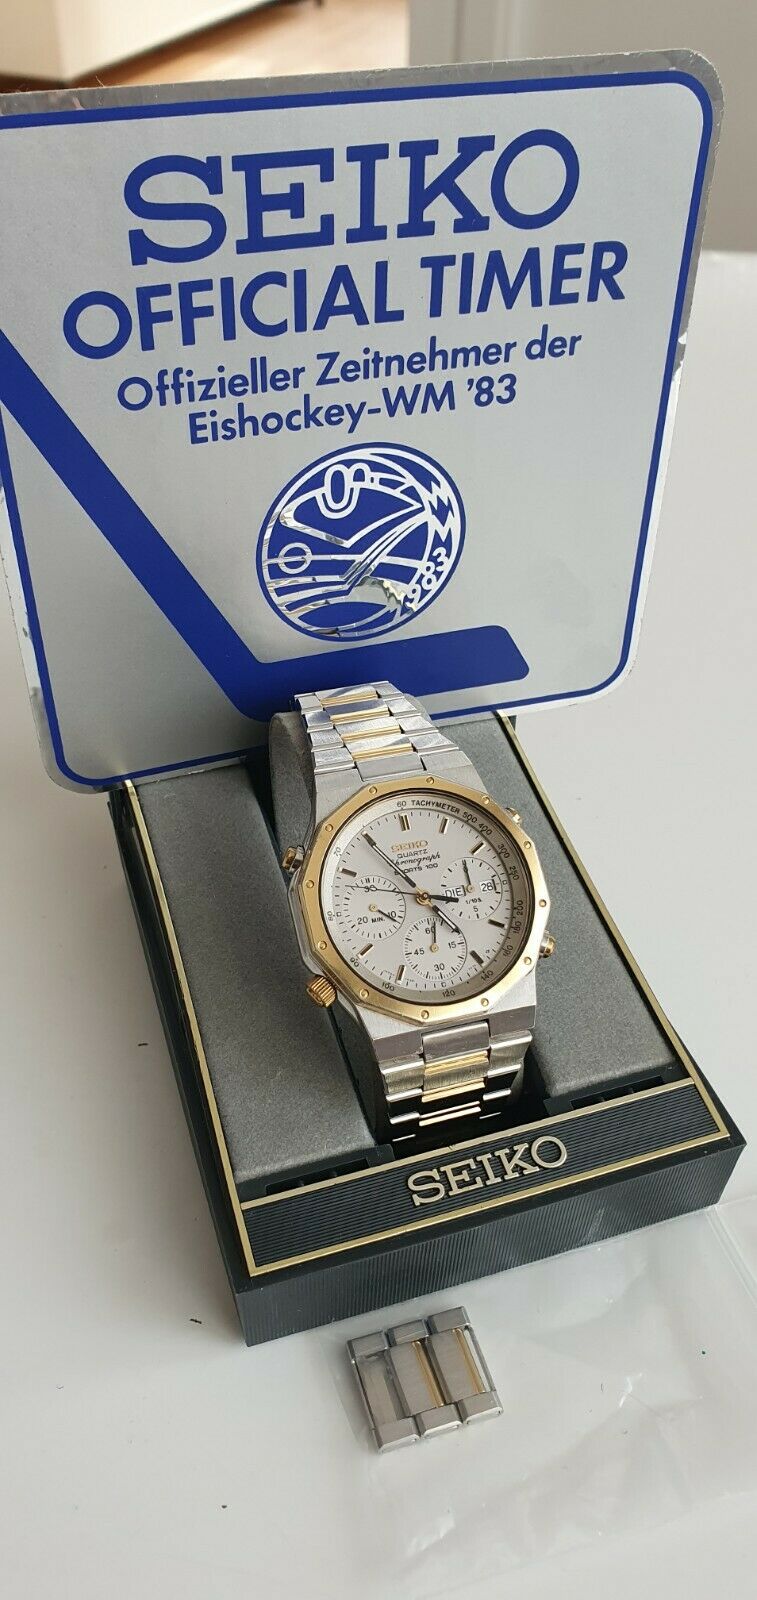 7A38-7020-Stainless+Gold-GreyFace-eBay(Germany)-Sept2021-(SeikoOfficialTimer)-1.jpg